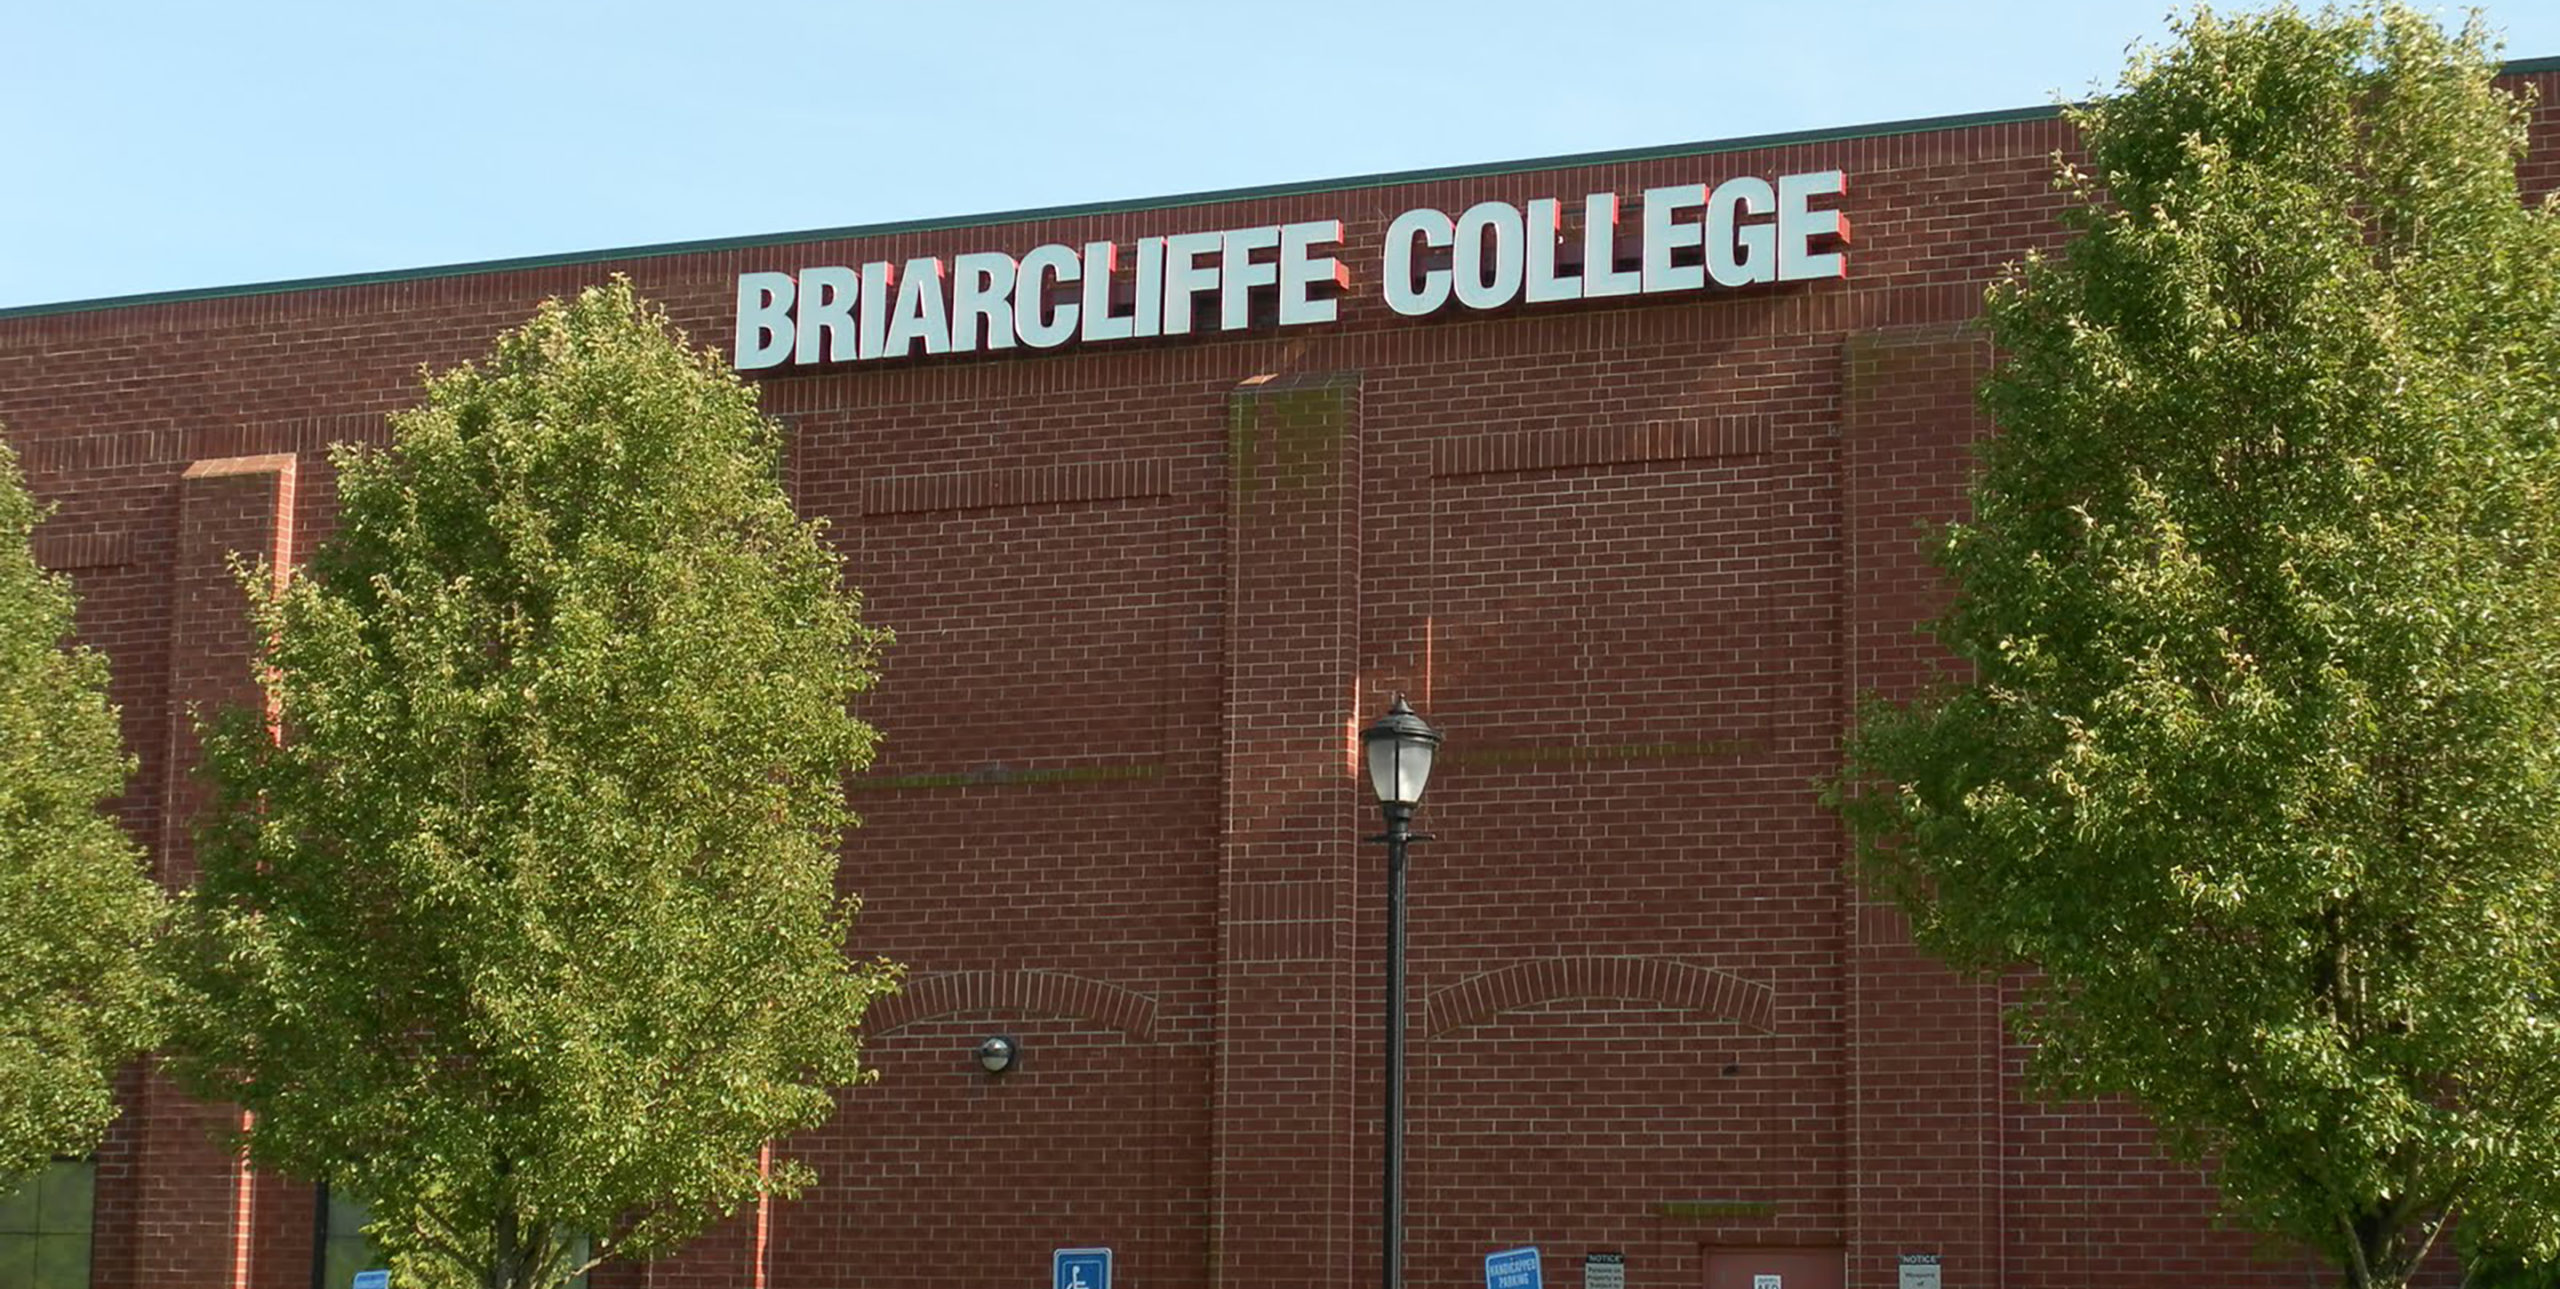 Briarcliffe College in Patchogue, NY